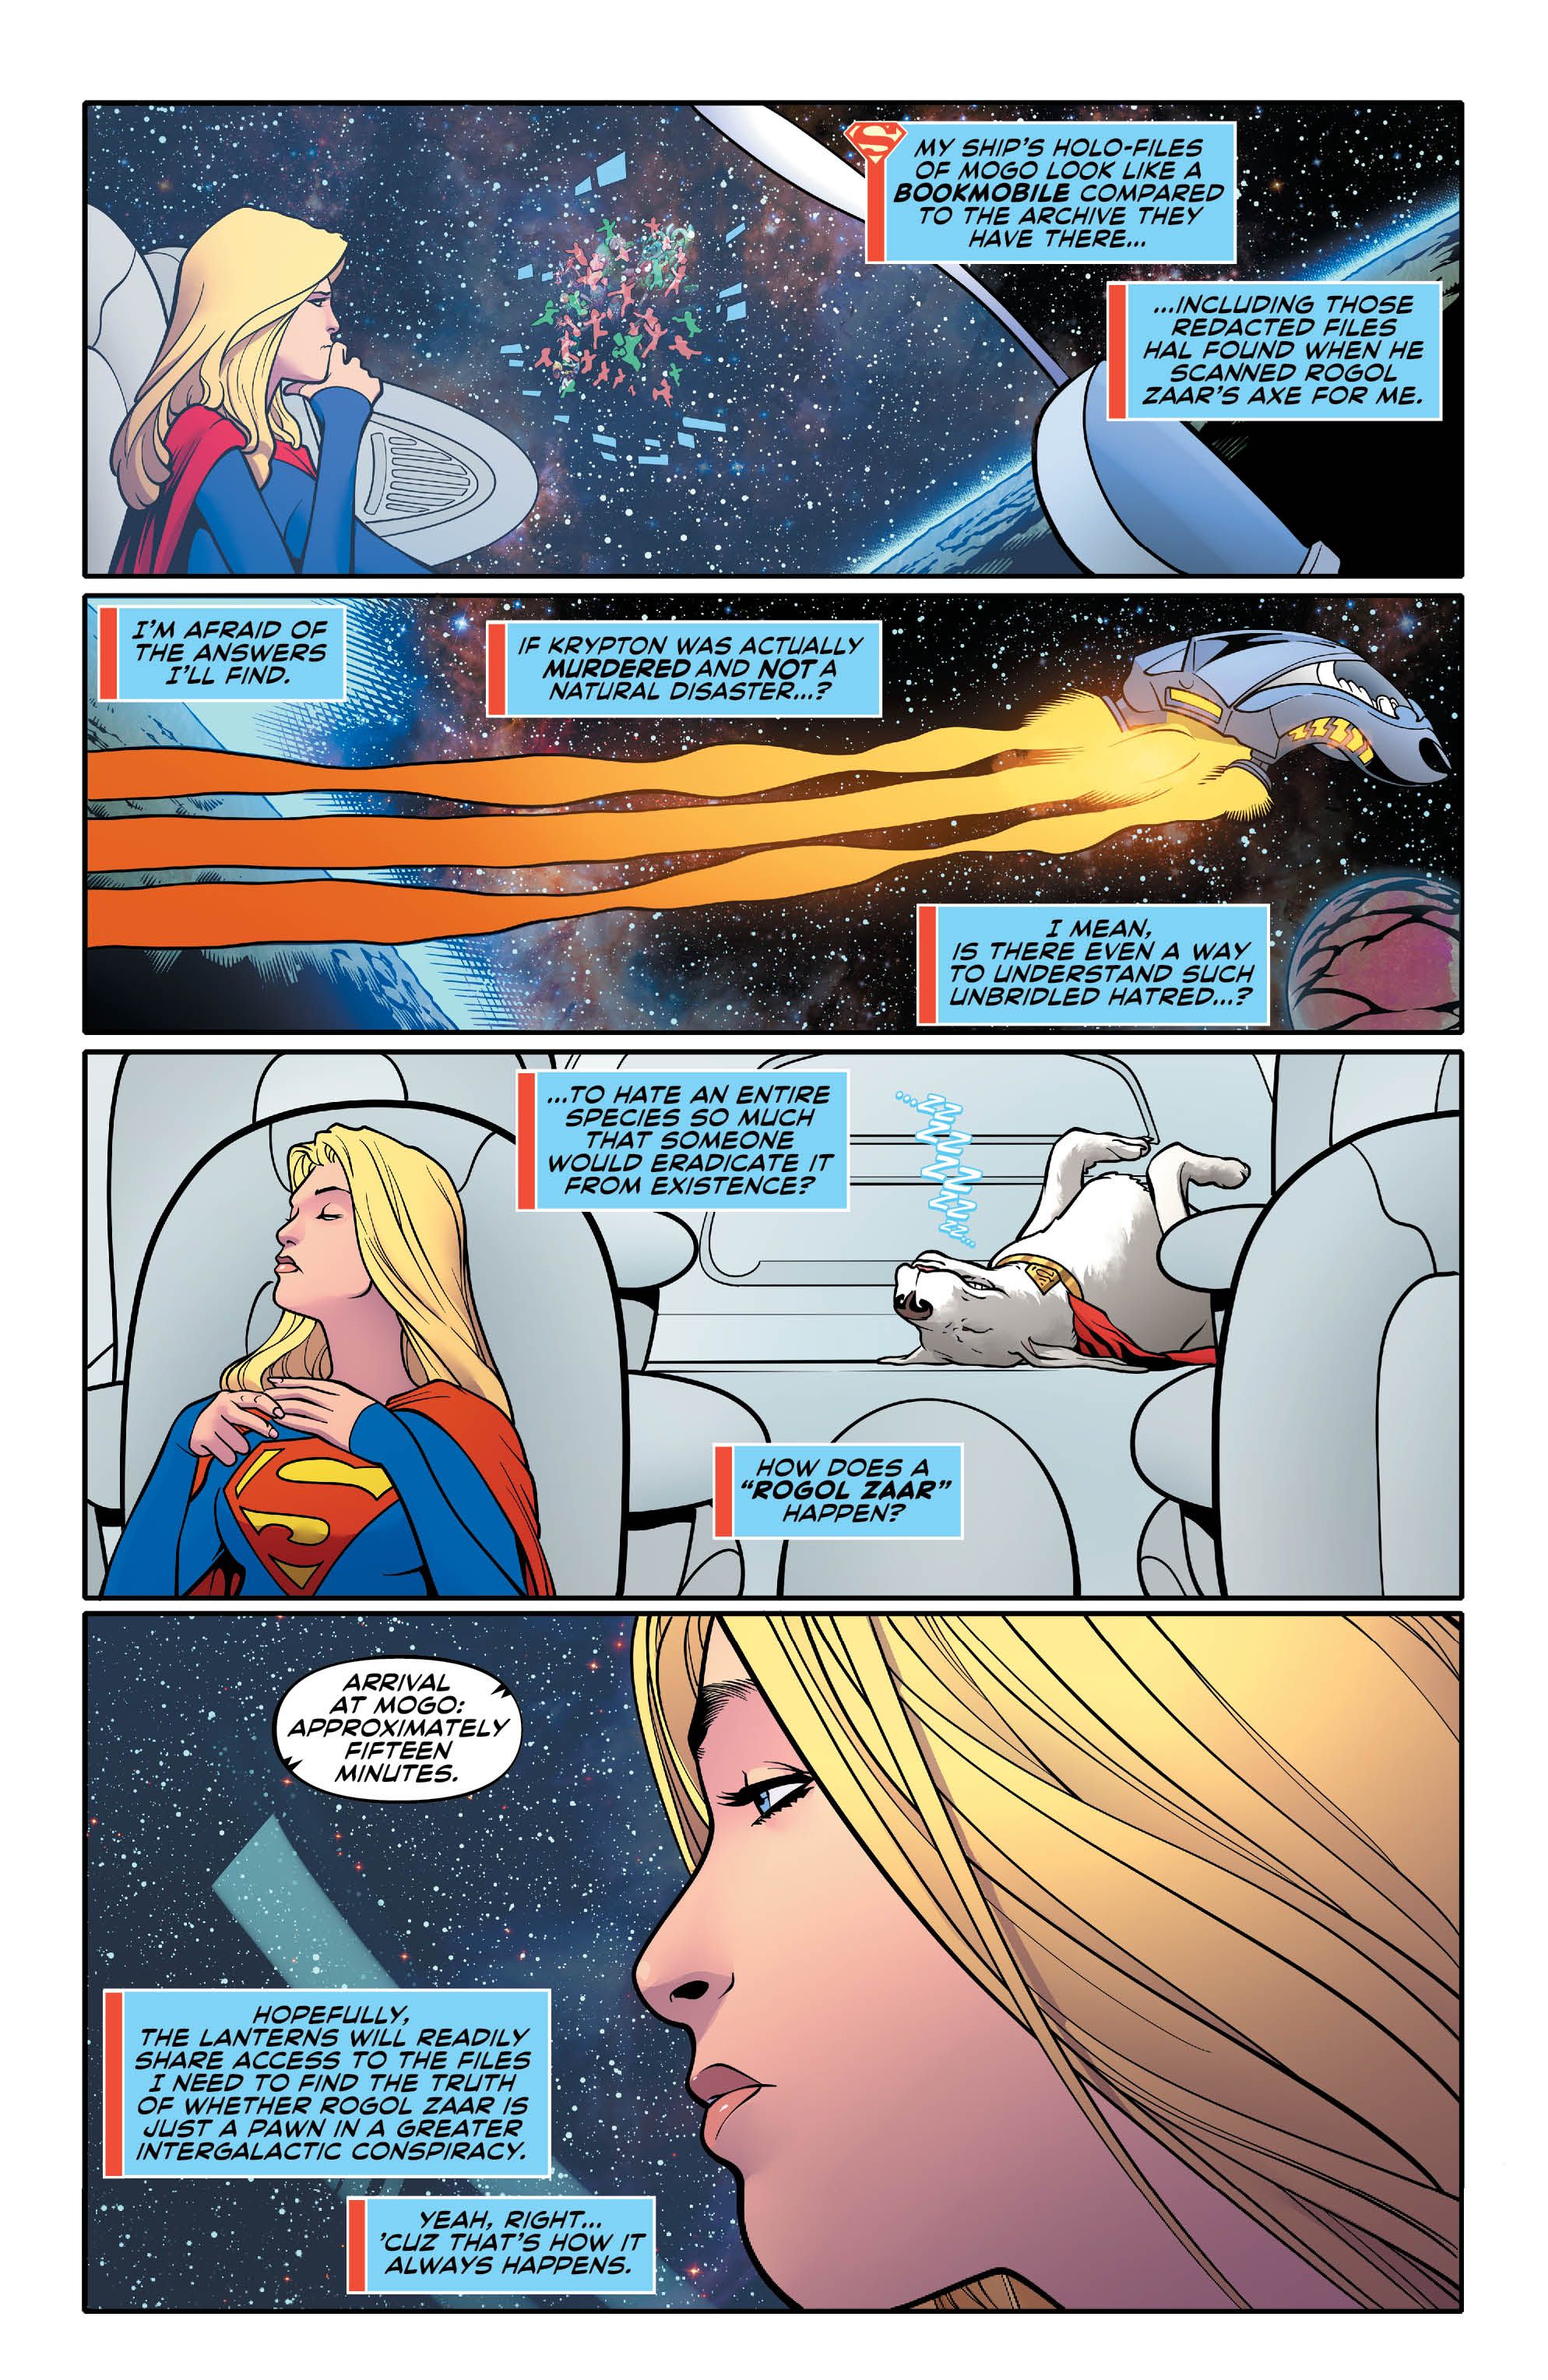 supergirl-22-preview-p2